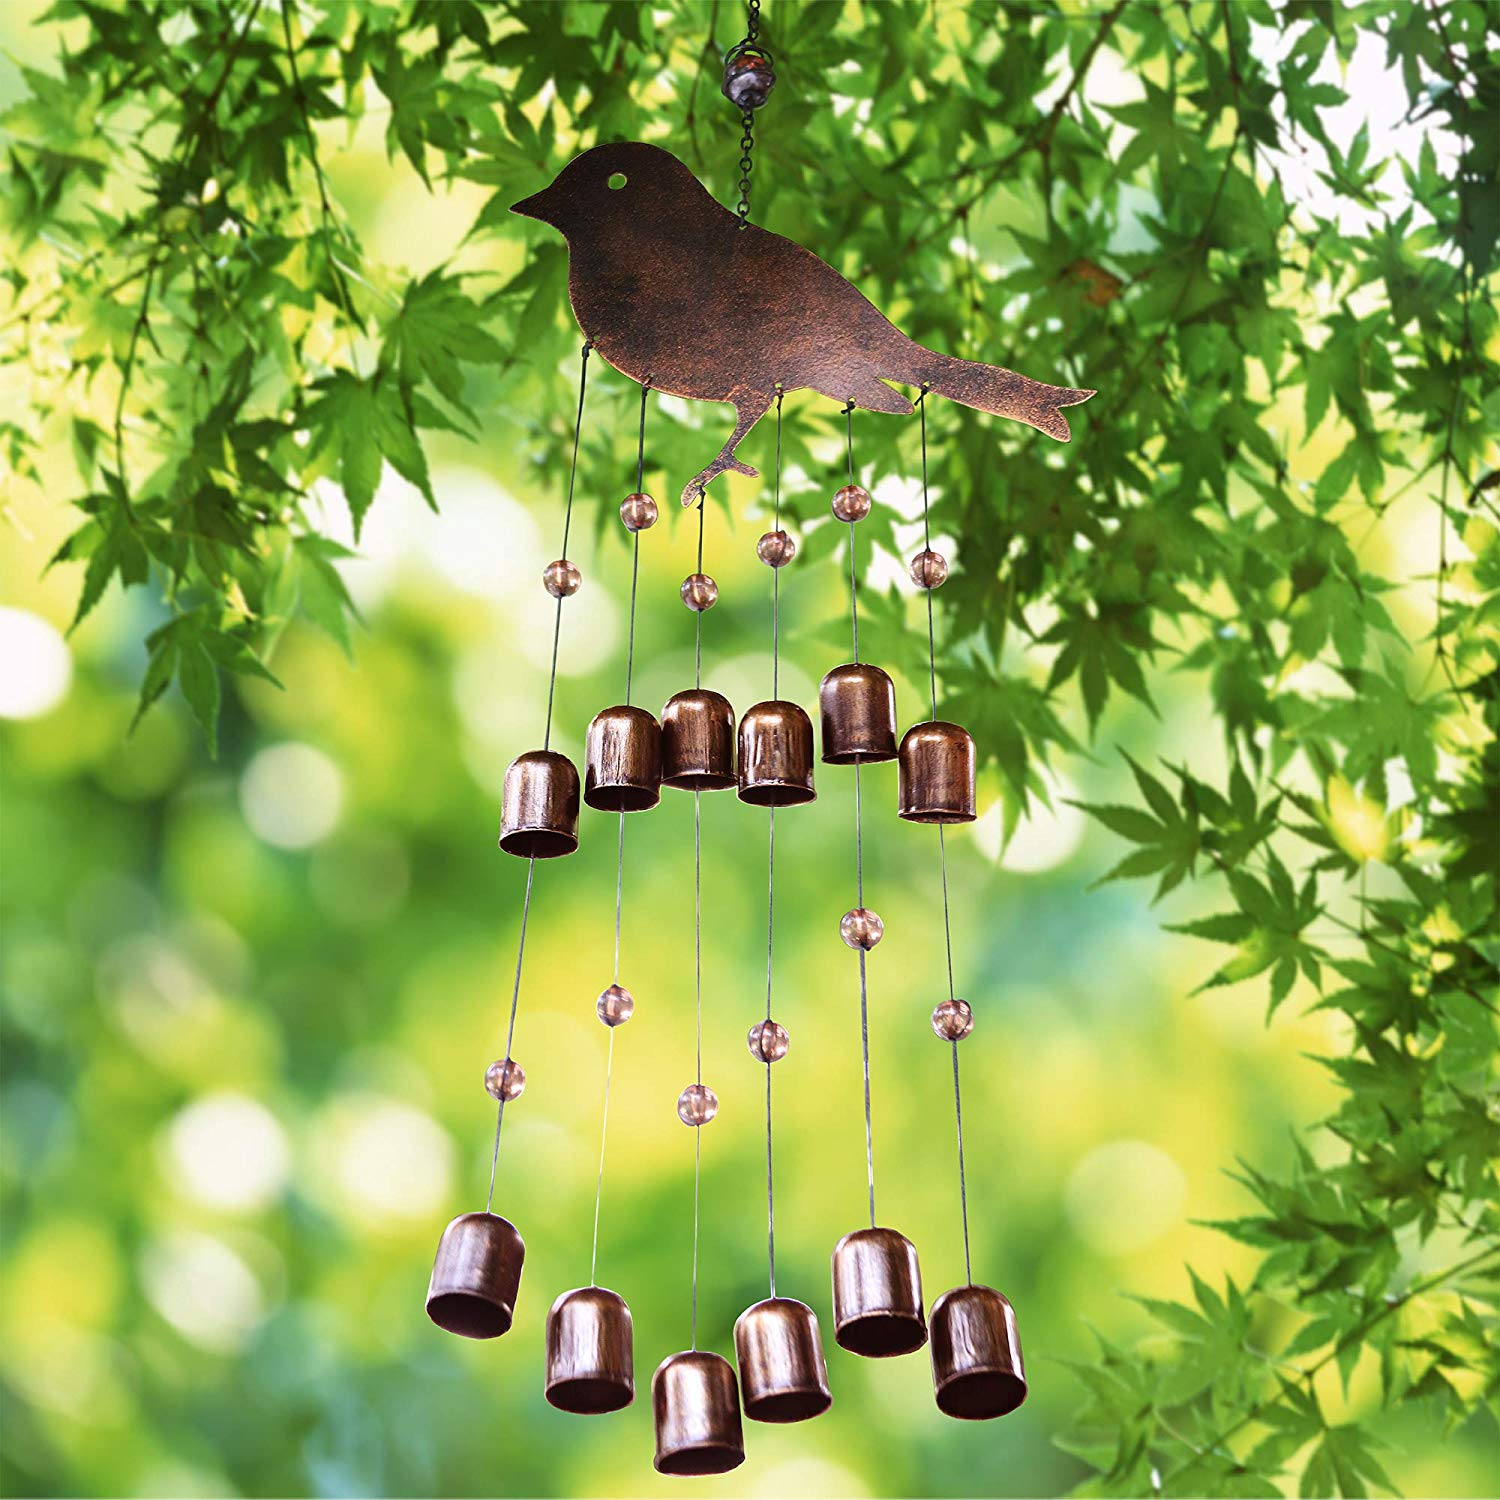 Outdoor Amazing Grace Homemade Hummingbird Wind Chime Bells China Supplier